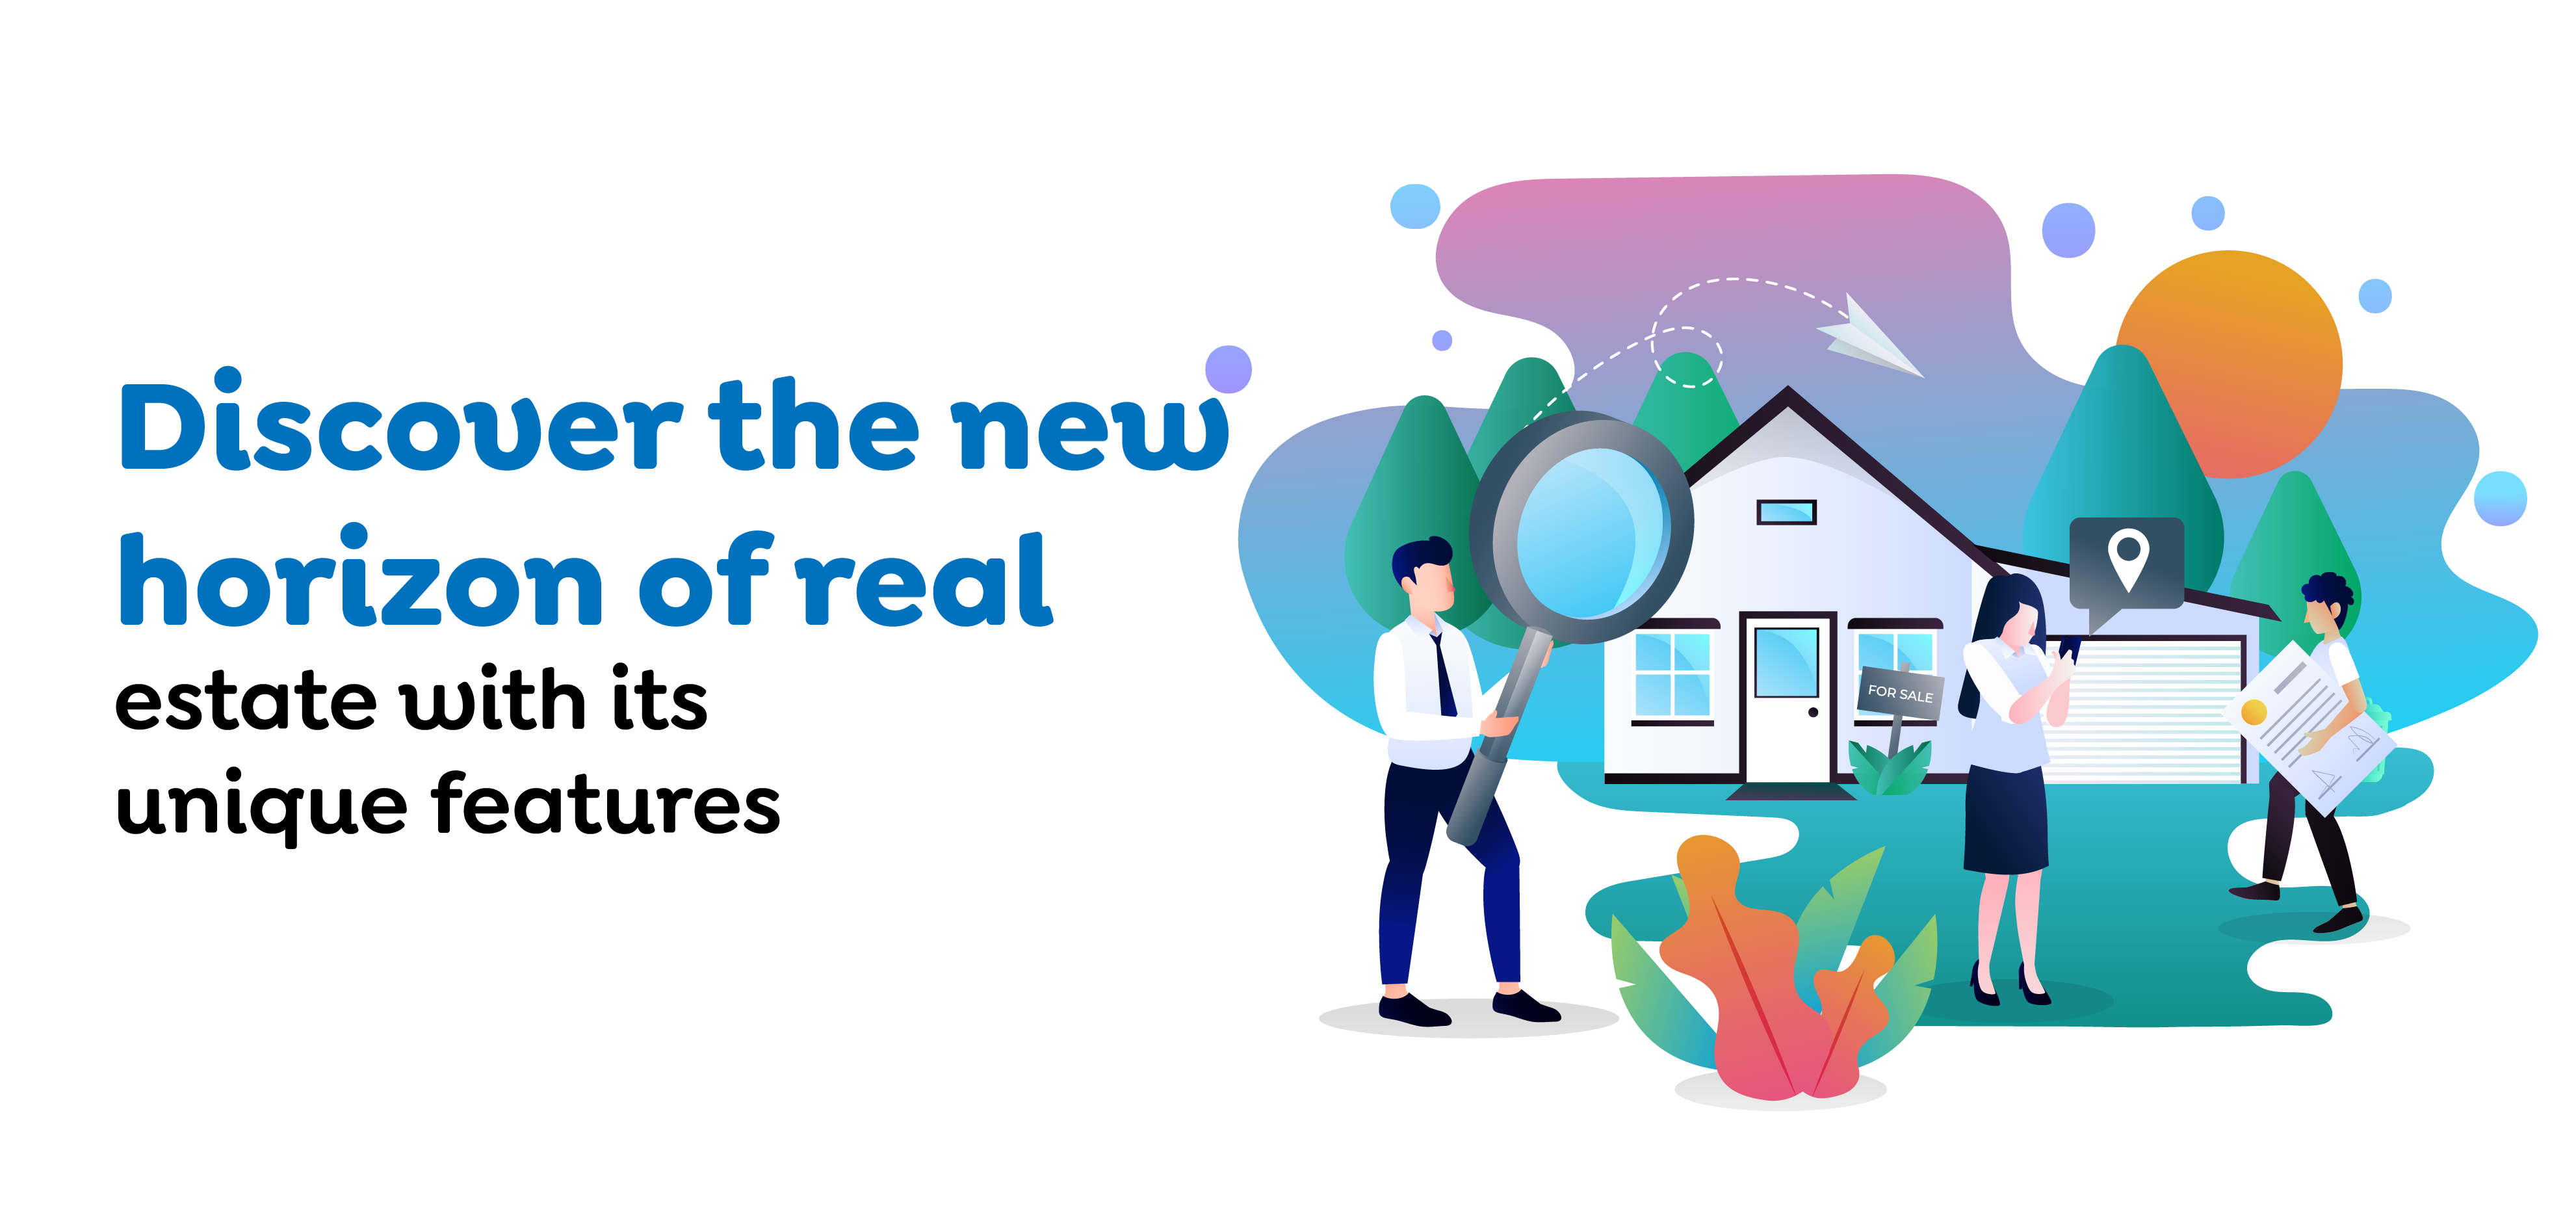 Discover the new horizon of real estate with its unique features